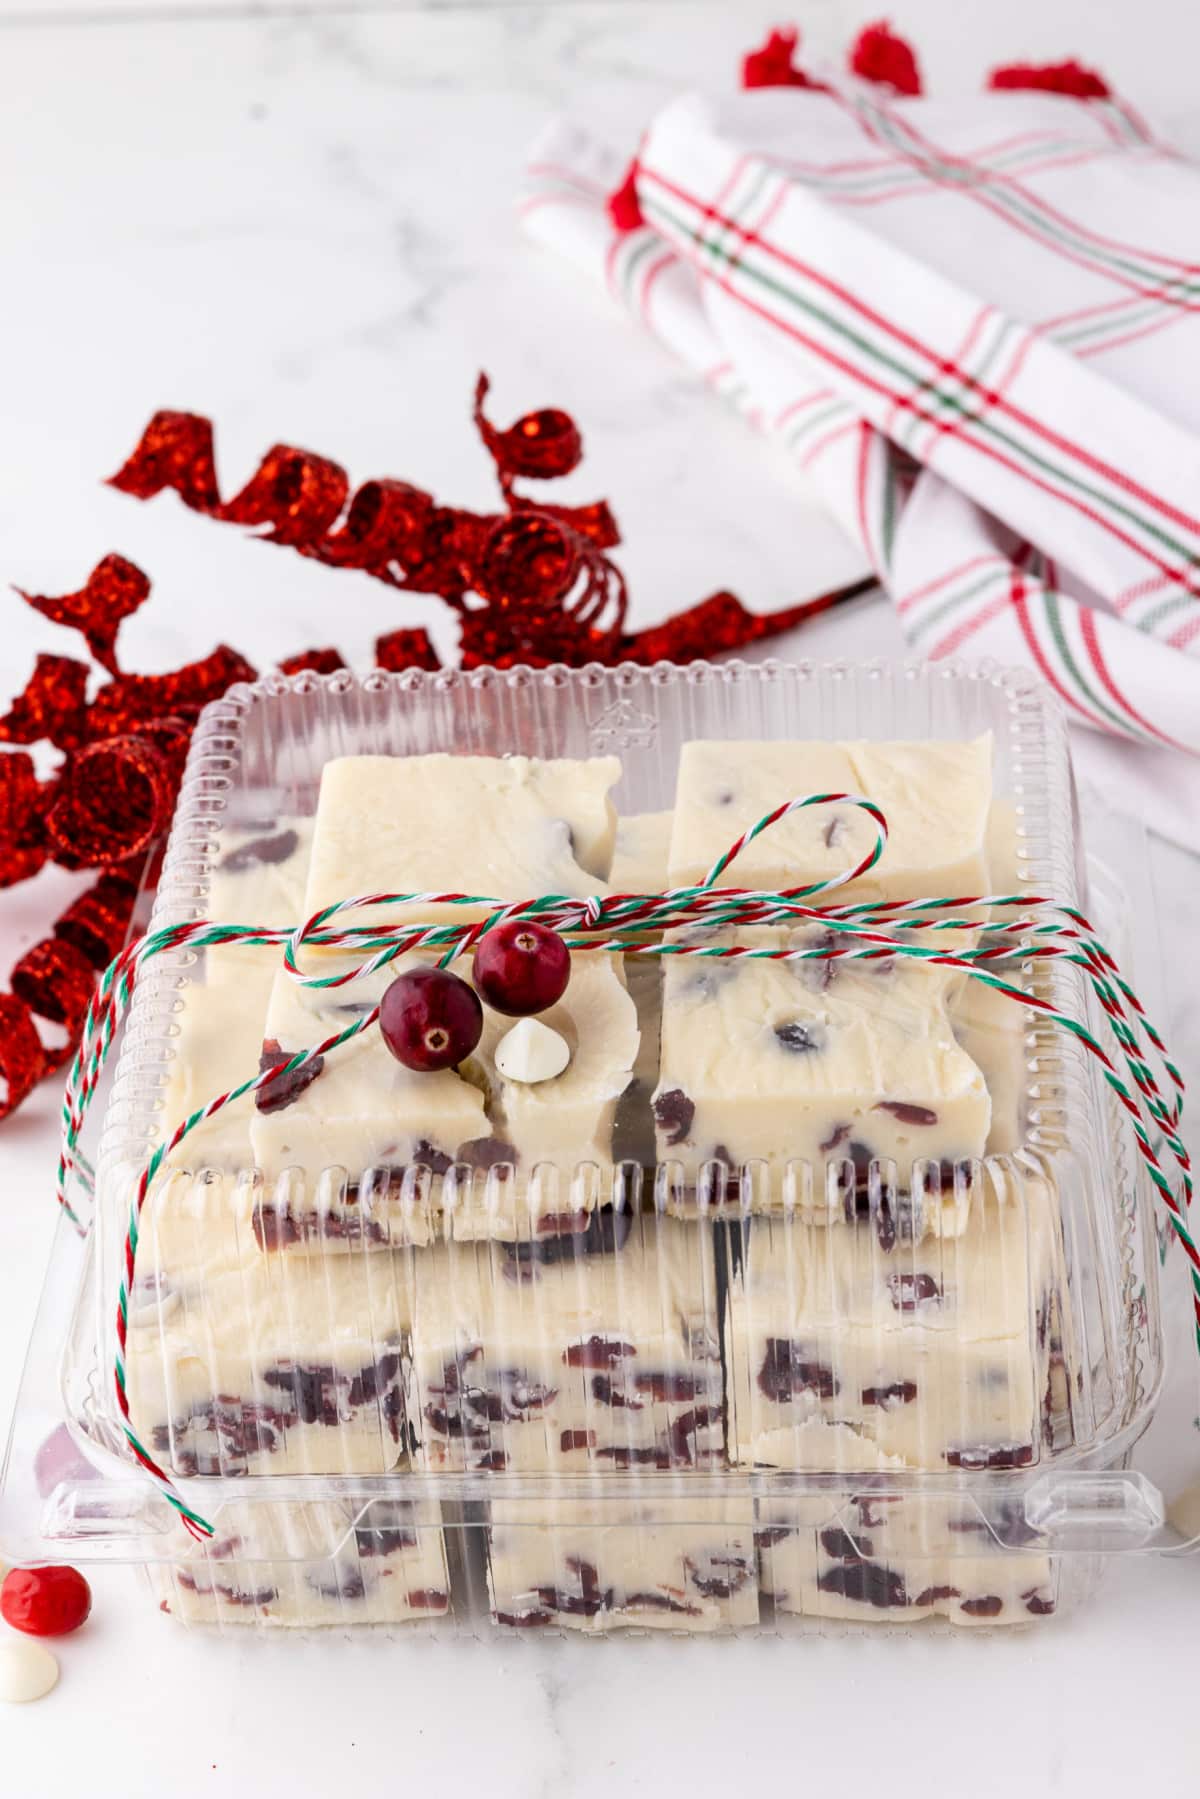 white fudge with cranberries in a plastic container decorated with holiday colors